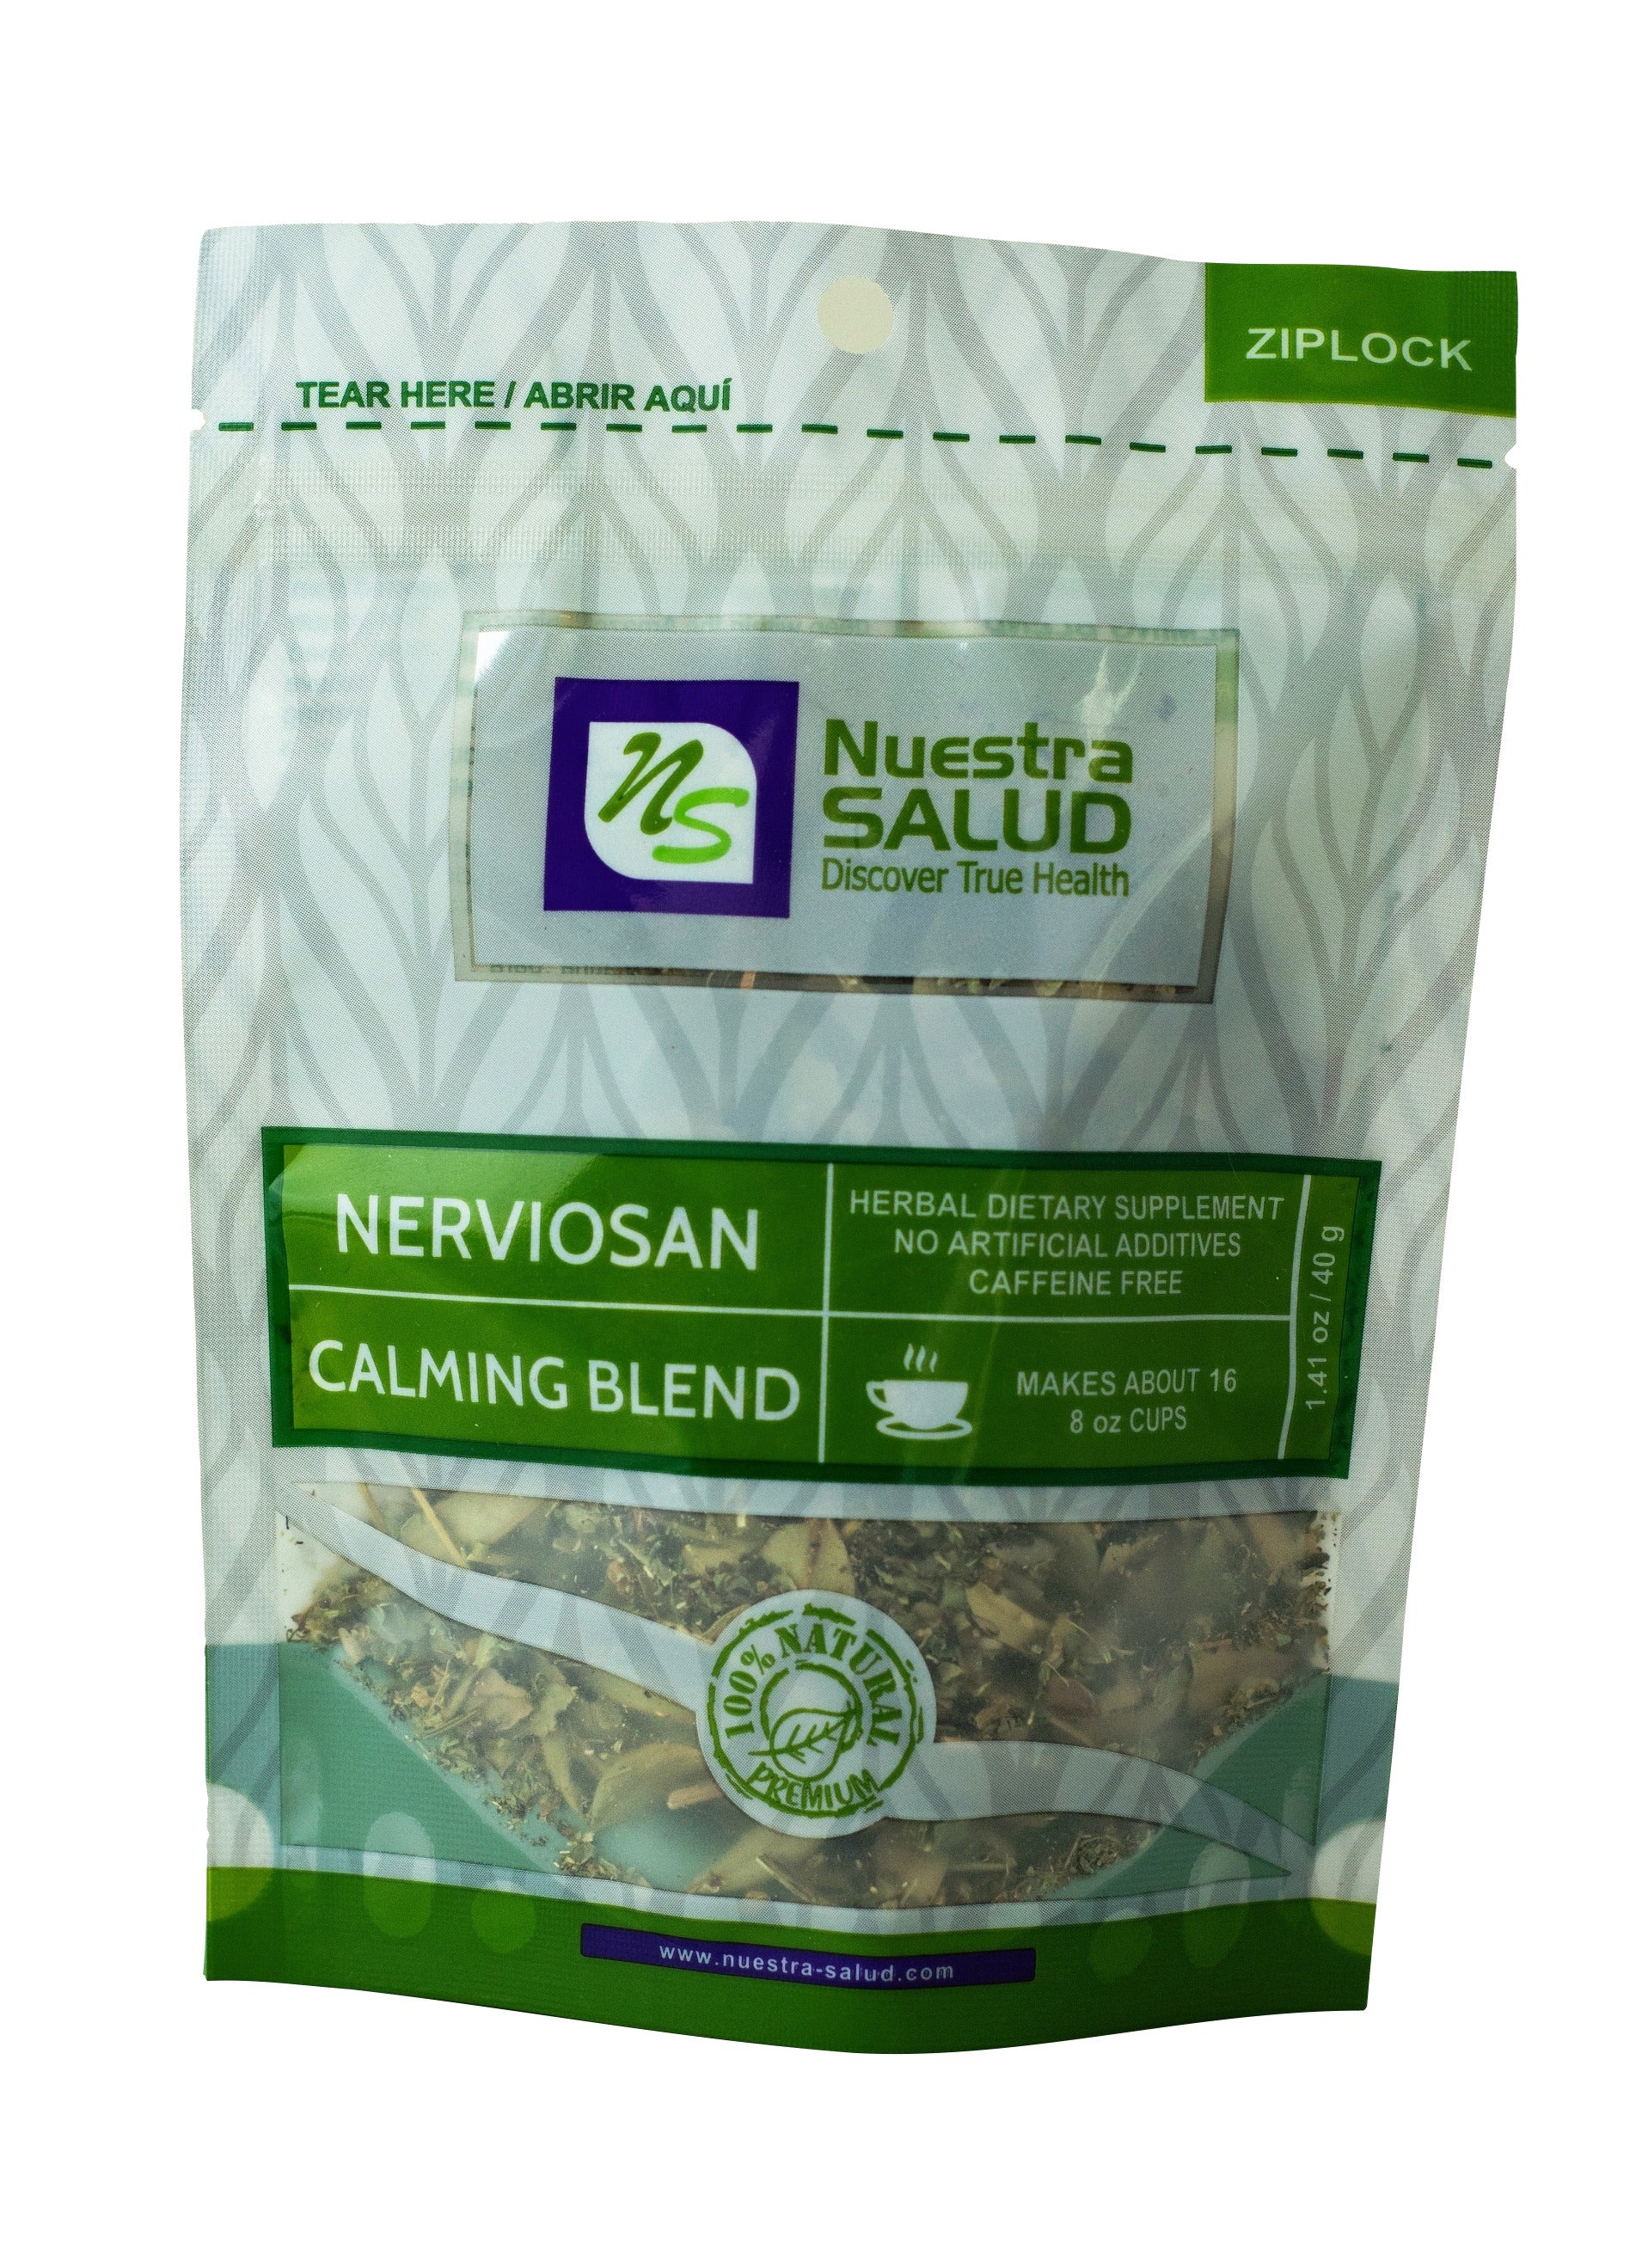  Calming Loose Blend Herbal Infusion Value Pack (120g) by Nuestra Salud sold by NS Herbs Co.